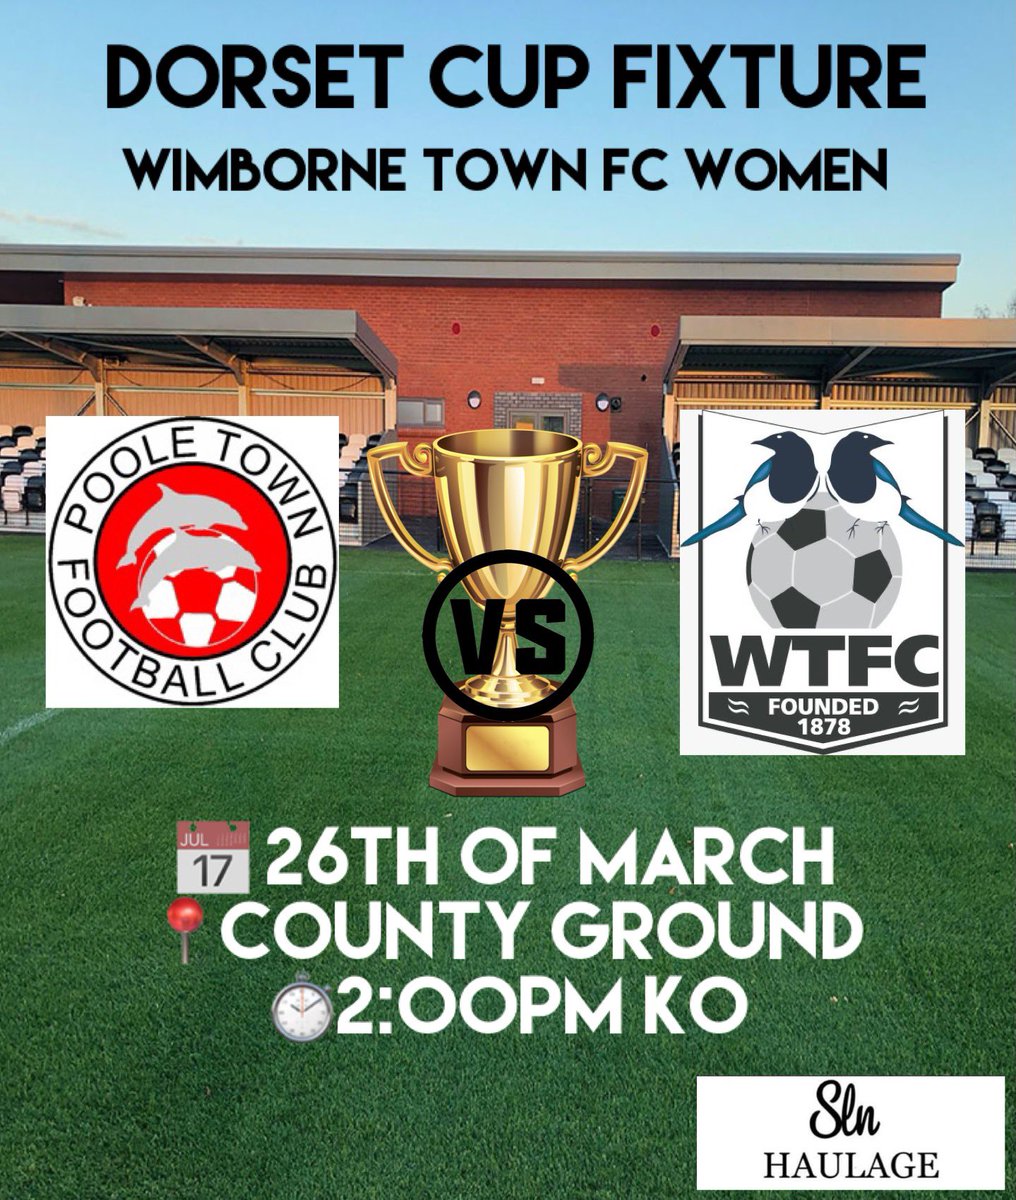 Semi finals of the cup 🙌⚫️⚪️

🆚Poole Town First Team 
📆 26th of March 
📍County Ground
⏱2pm

Please come and support us 🙌⚫️⚪️

#upthemagpies #WimborneTownFc